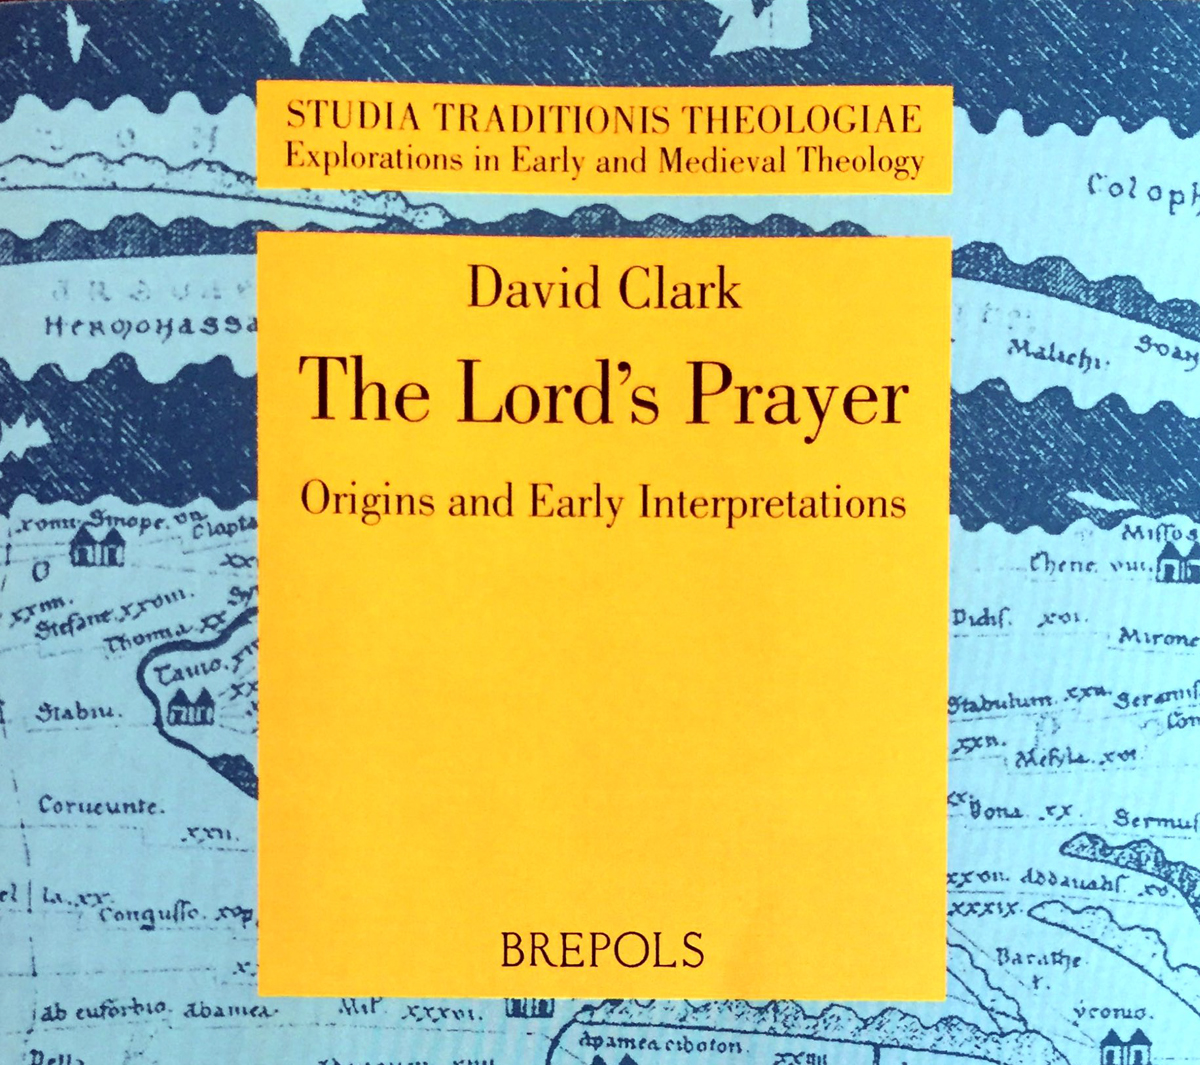 The Lord's Prayer: Origins and Early Interpretations